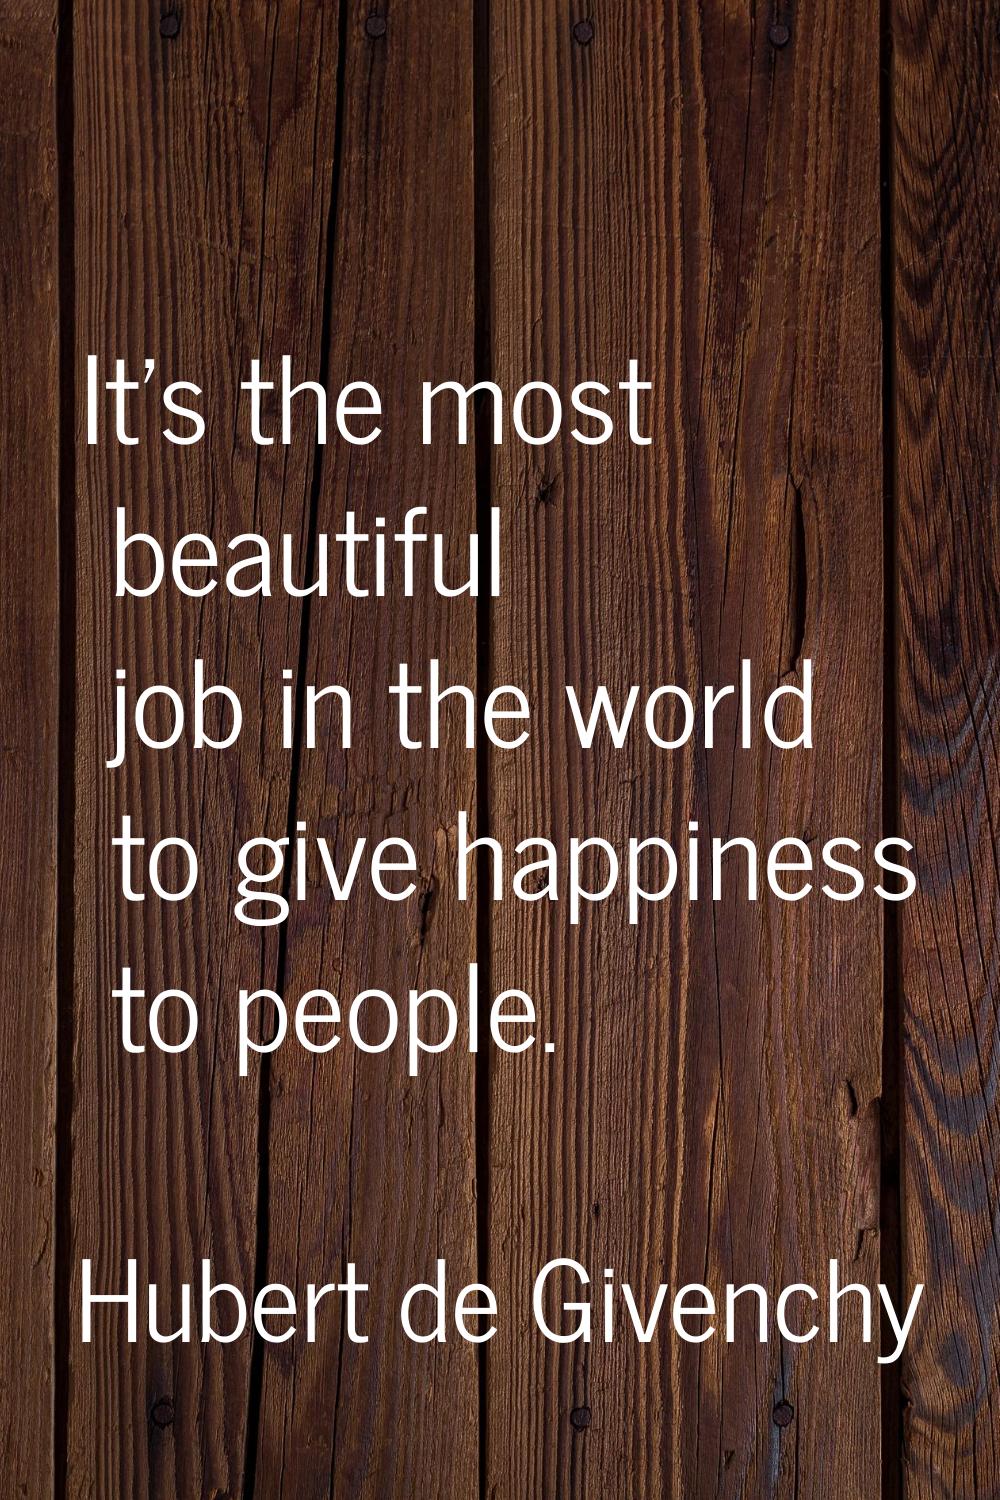 It's the most beautiful job in the world to give happiness to people.